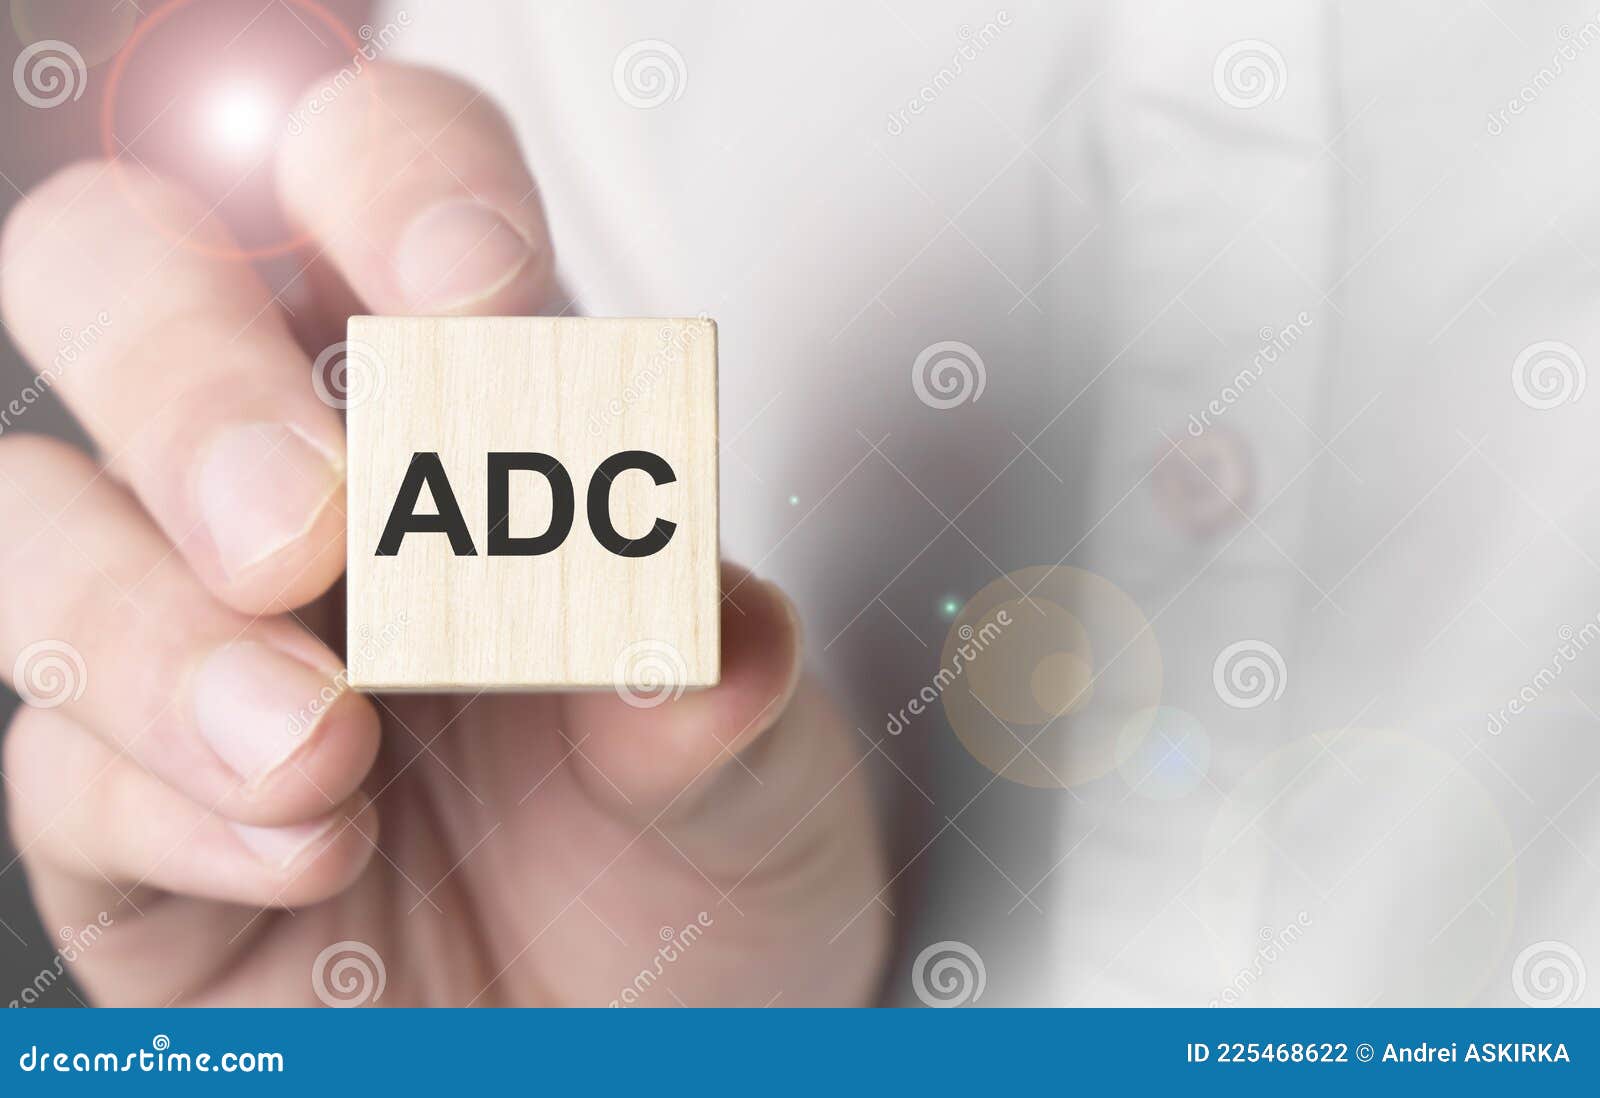 man holding adc word on wooden cube